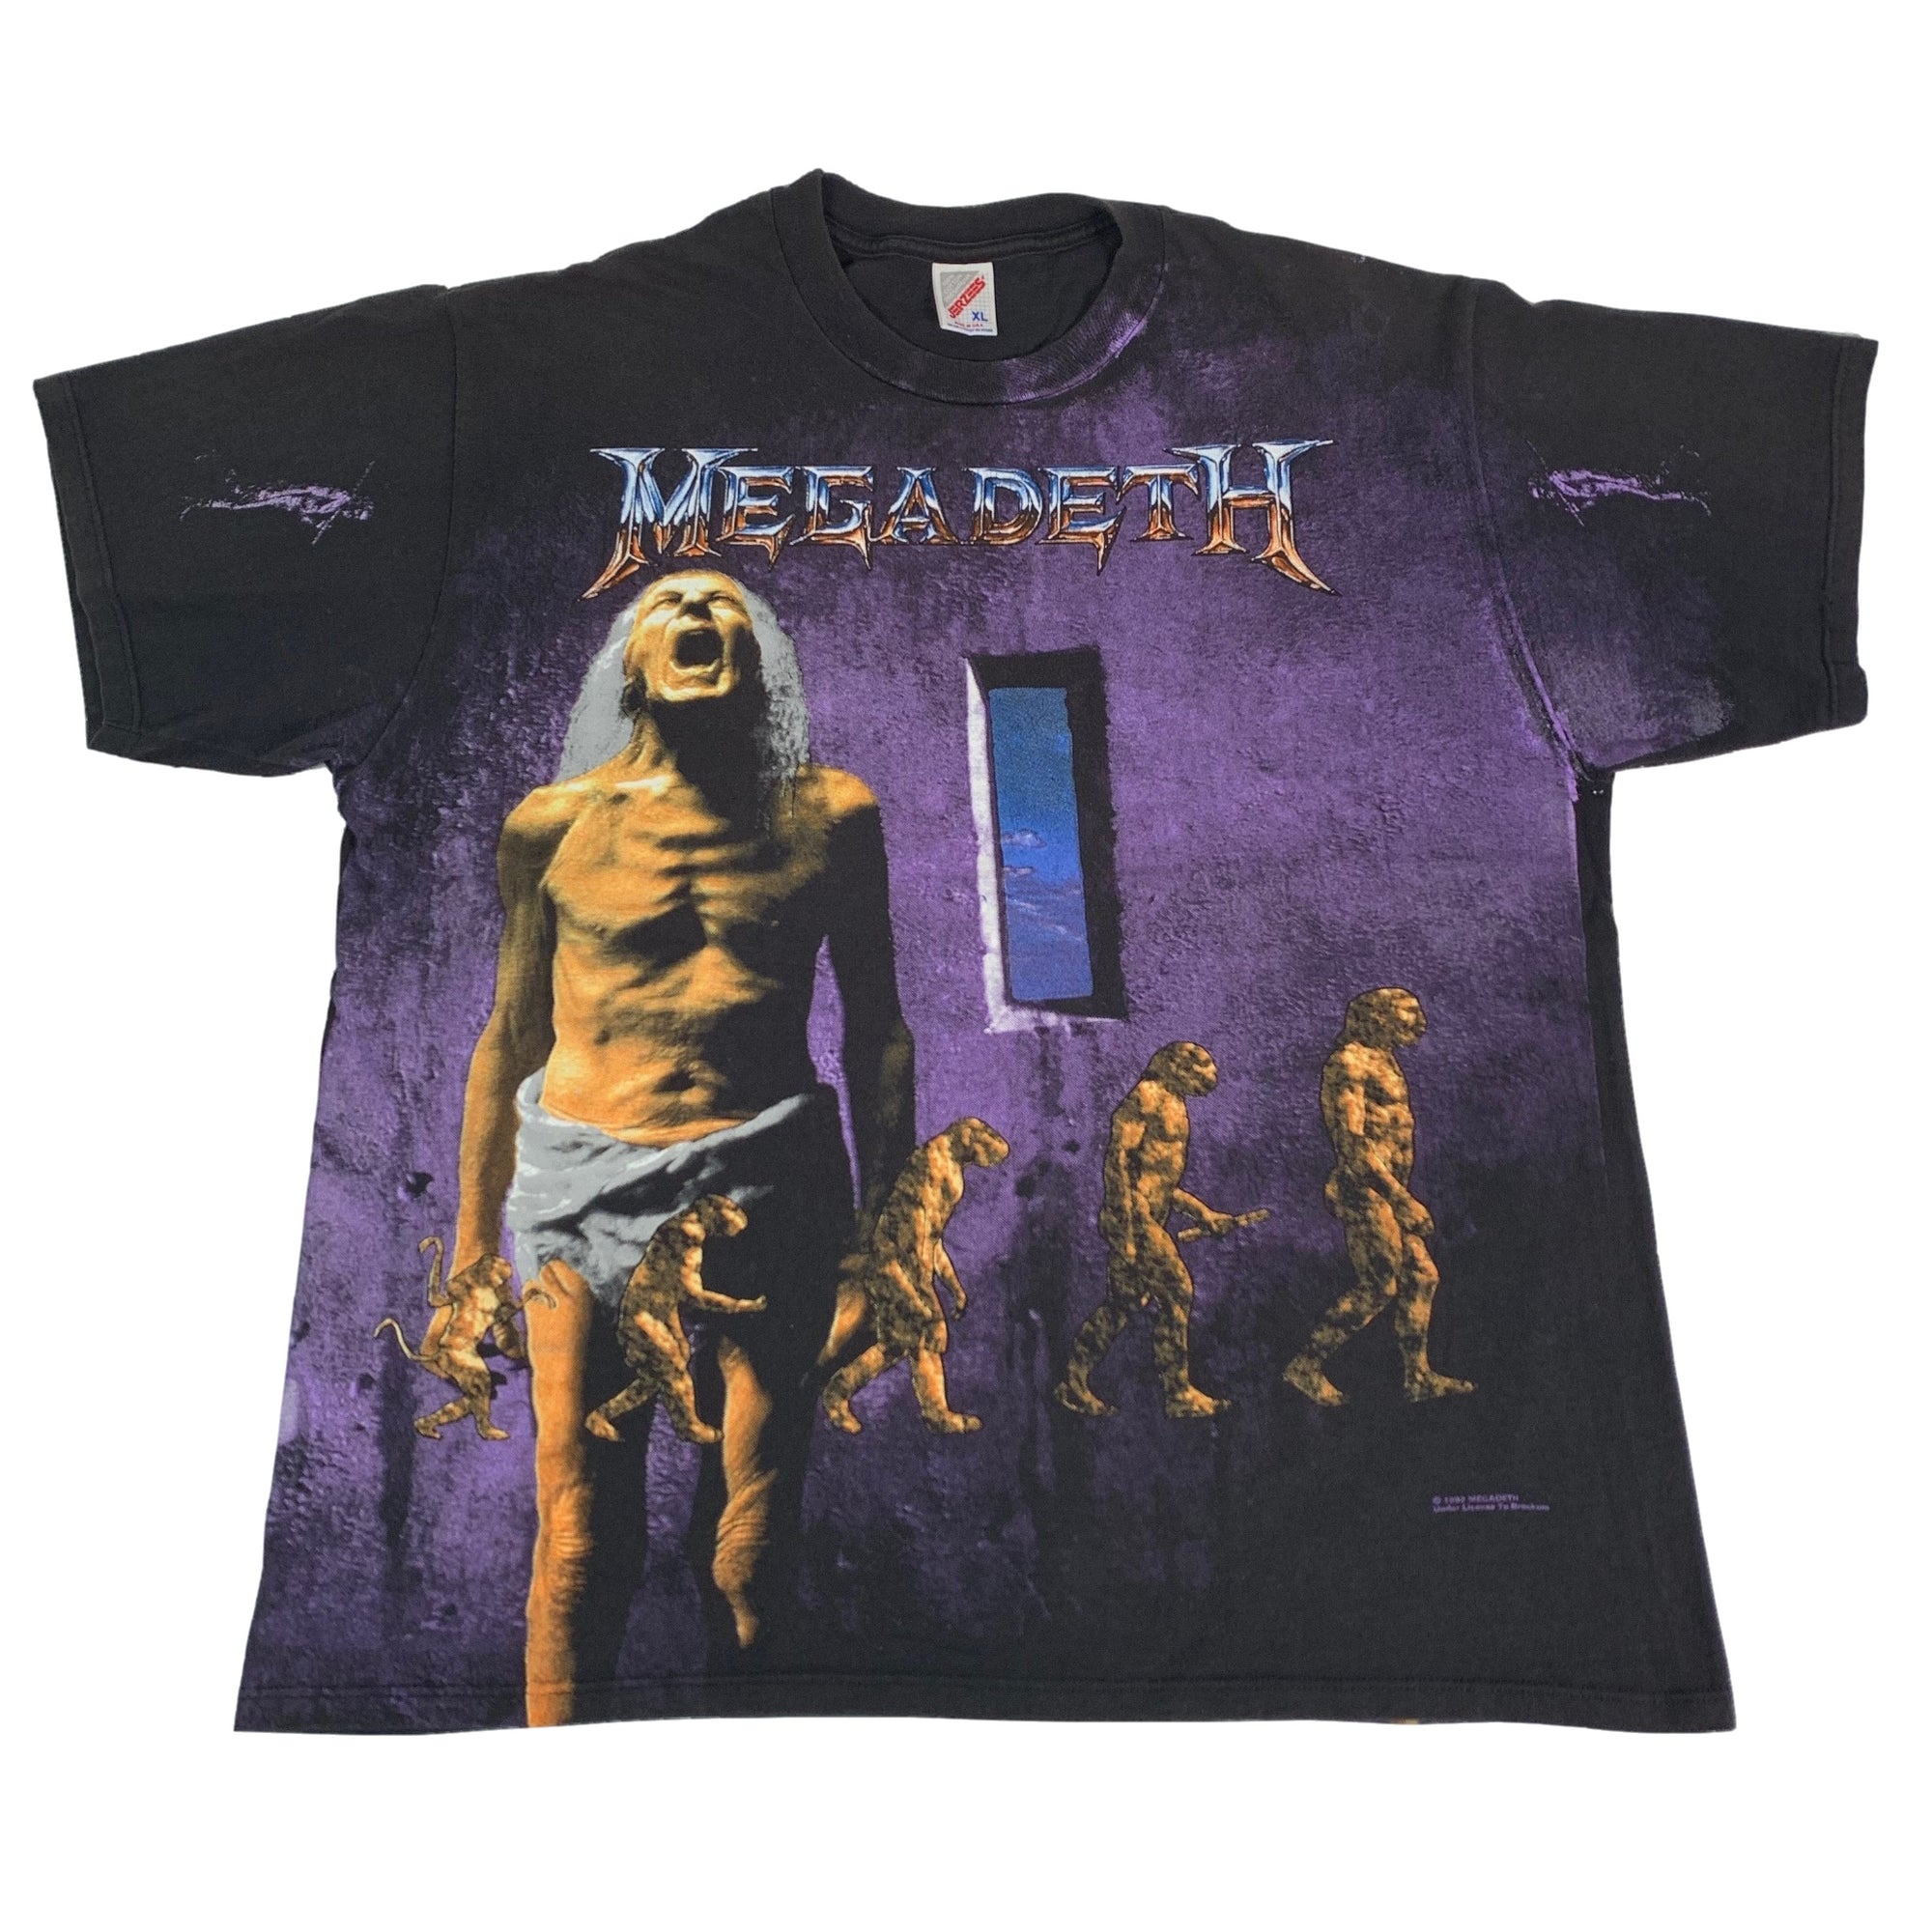 Vintage Megadeth "Countdown To Extinction" All Over Print T-Shirt - jointcustodydc